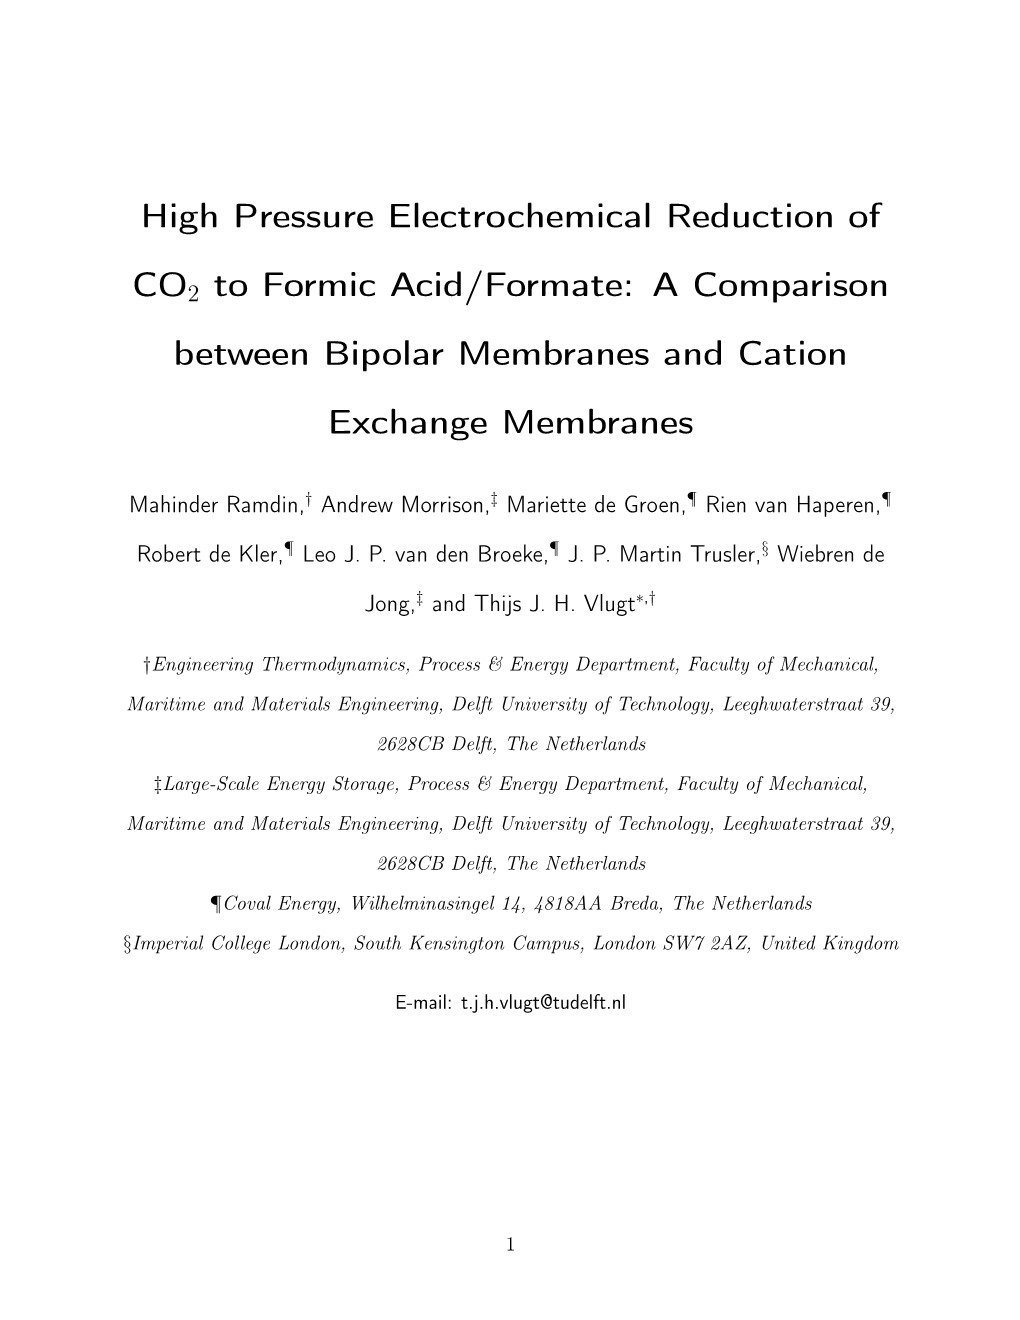 High Pressure Electrochemical Reduction of CO2